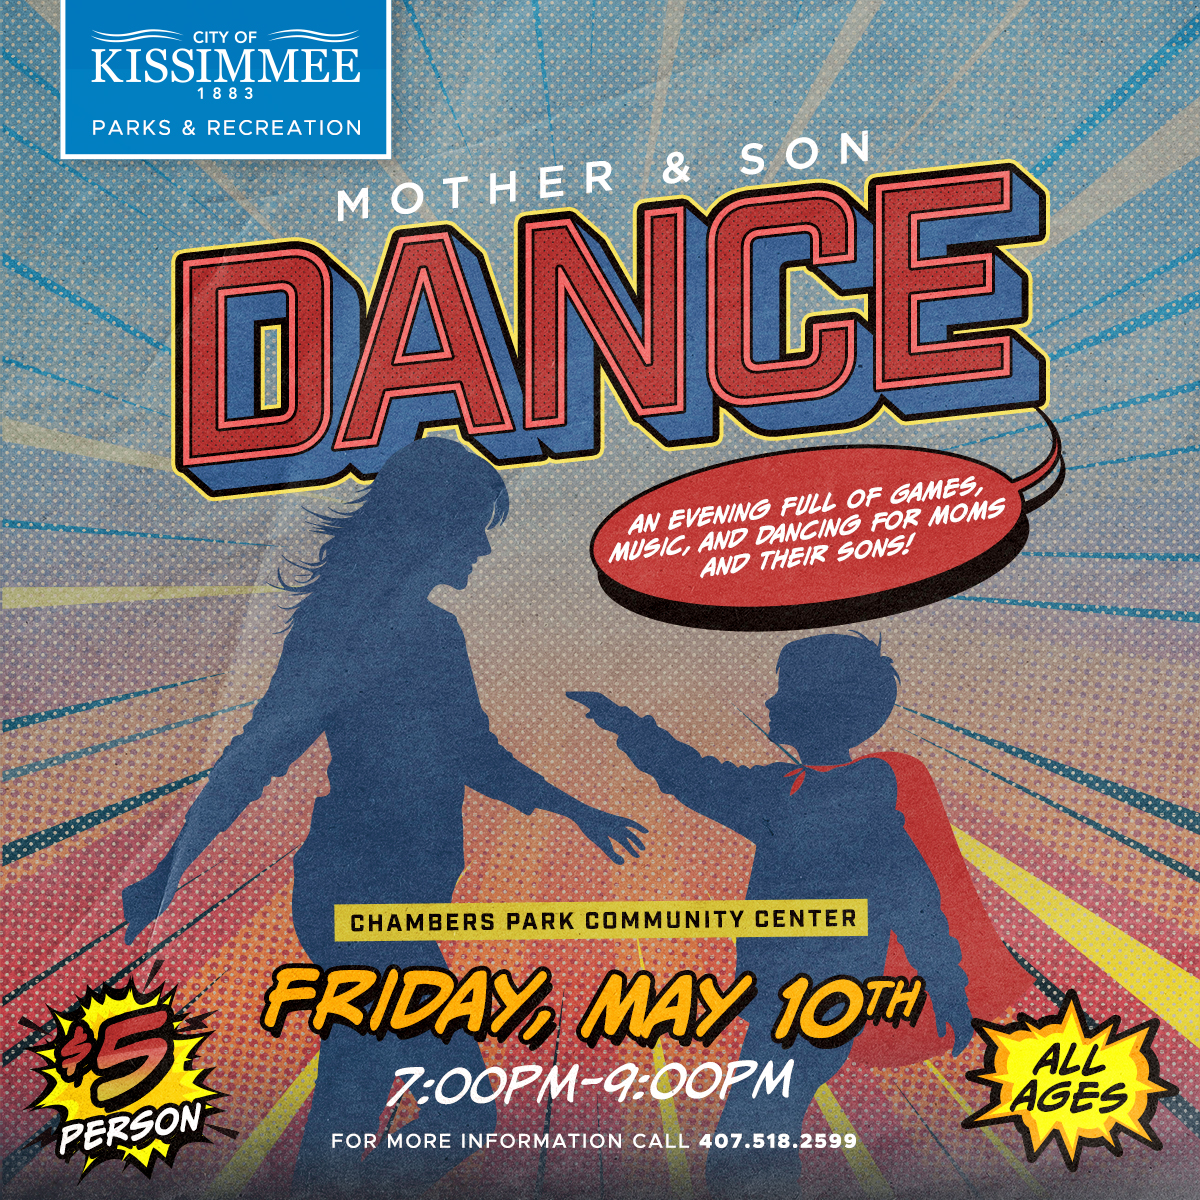 🌟 Make memories together at our Mother & Son Dance event! 🎉 Join us for a fun-filled evening of games, music, and dancing. It's the perfect opportunity to bond and have a blast! 🗓️ May 10 ⏰ 7 pm - 9 pm 📍 Chambers Park Community Center